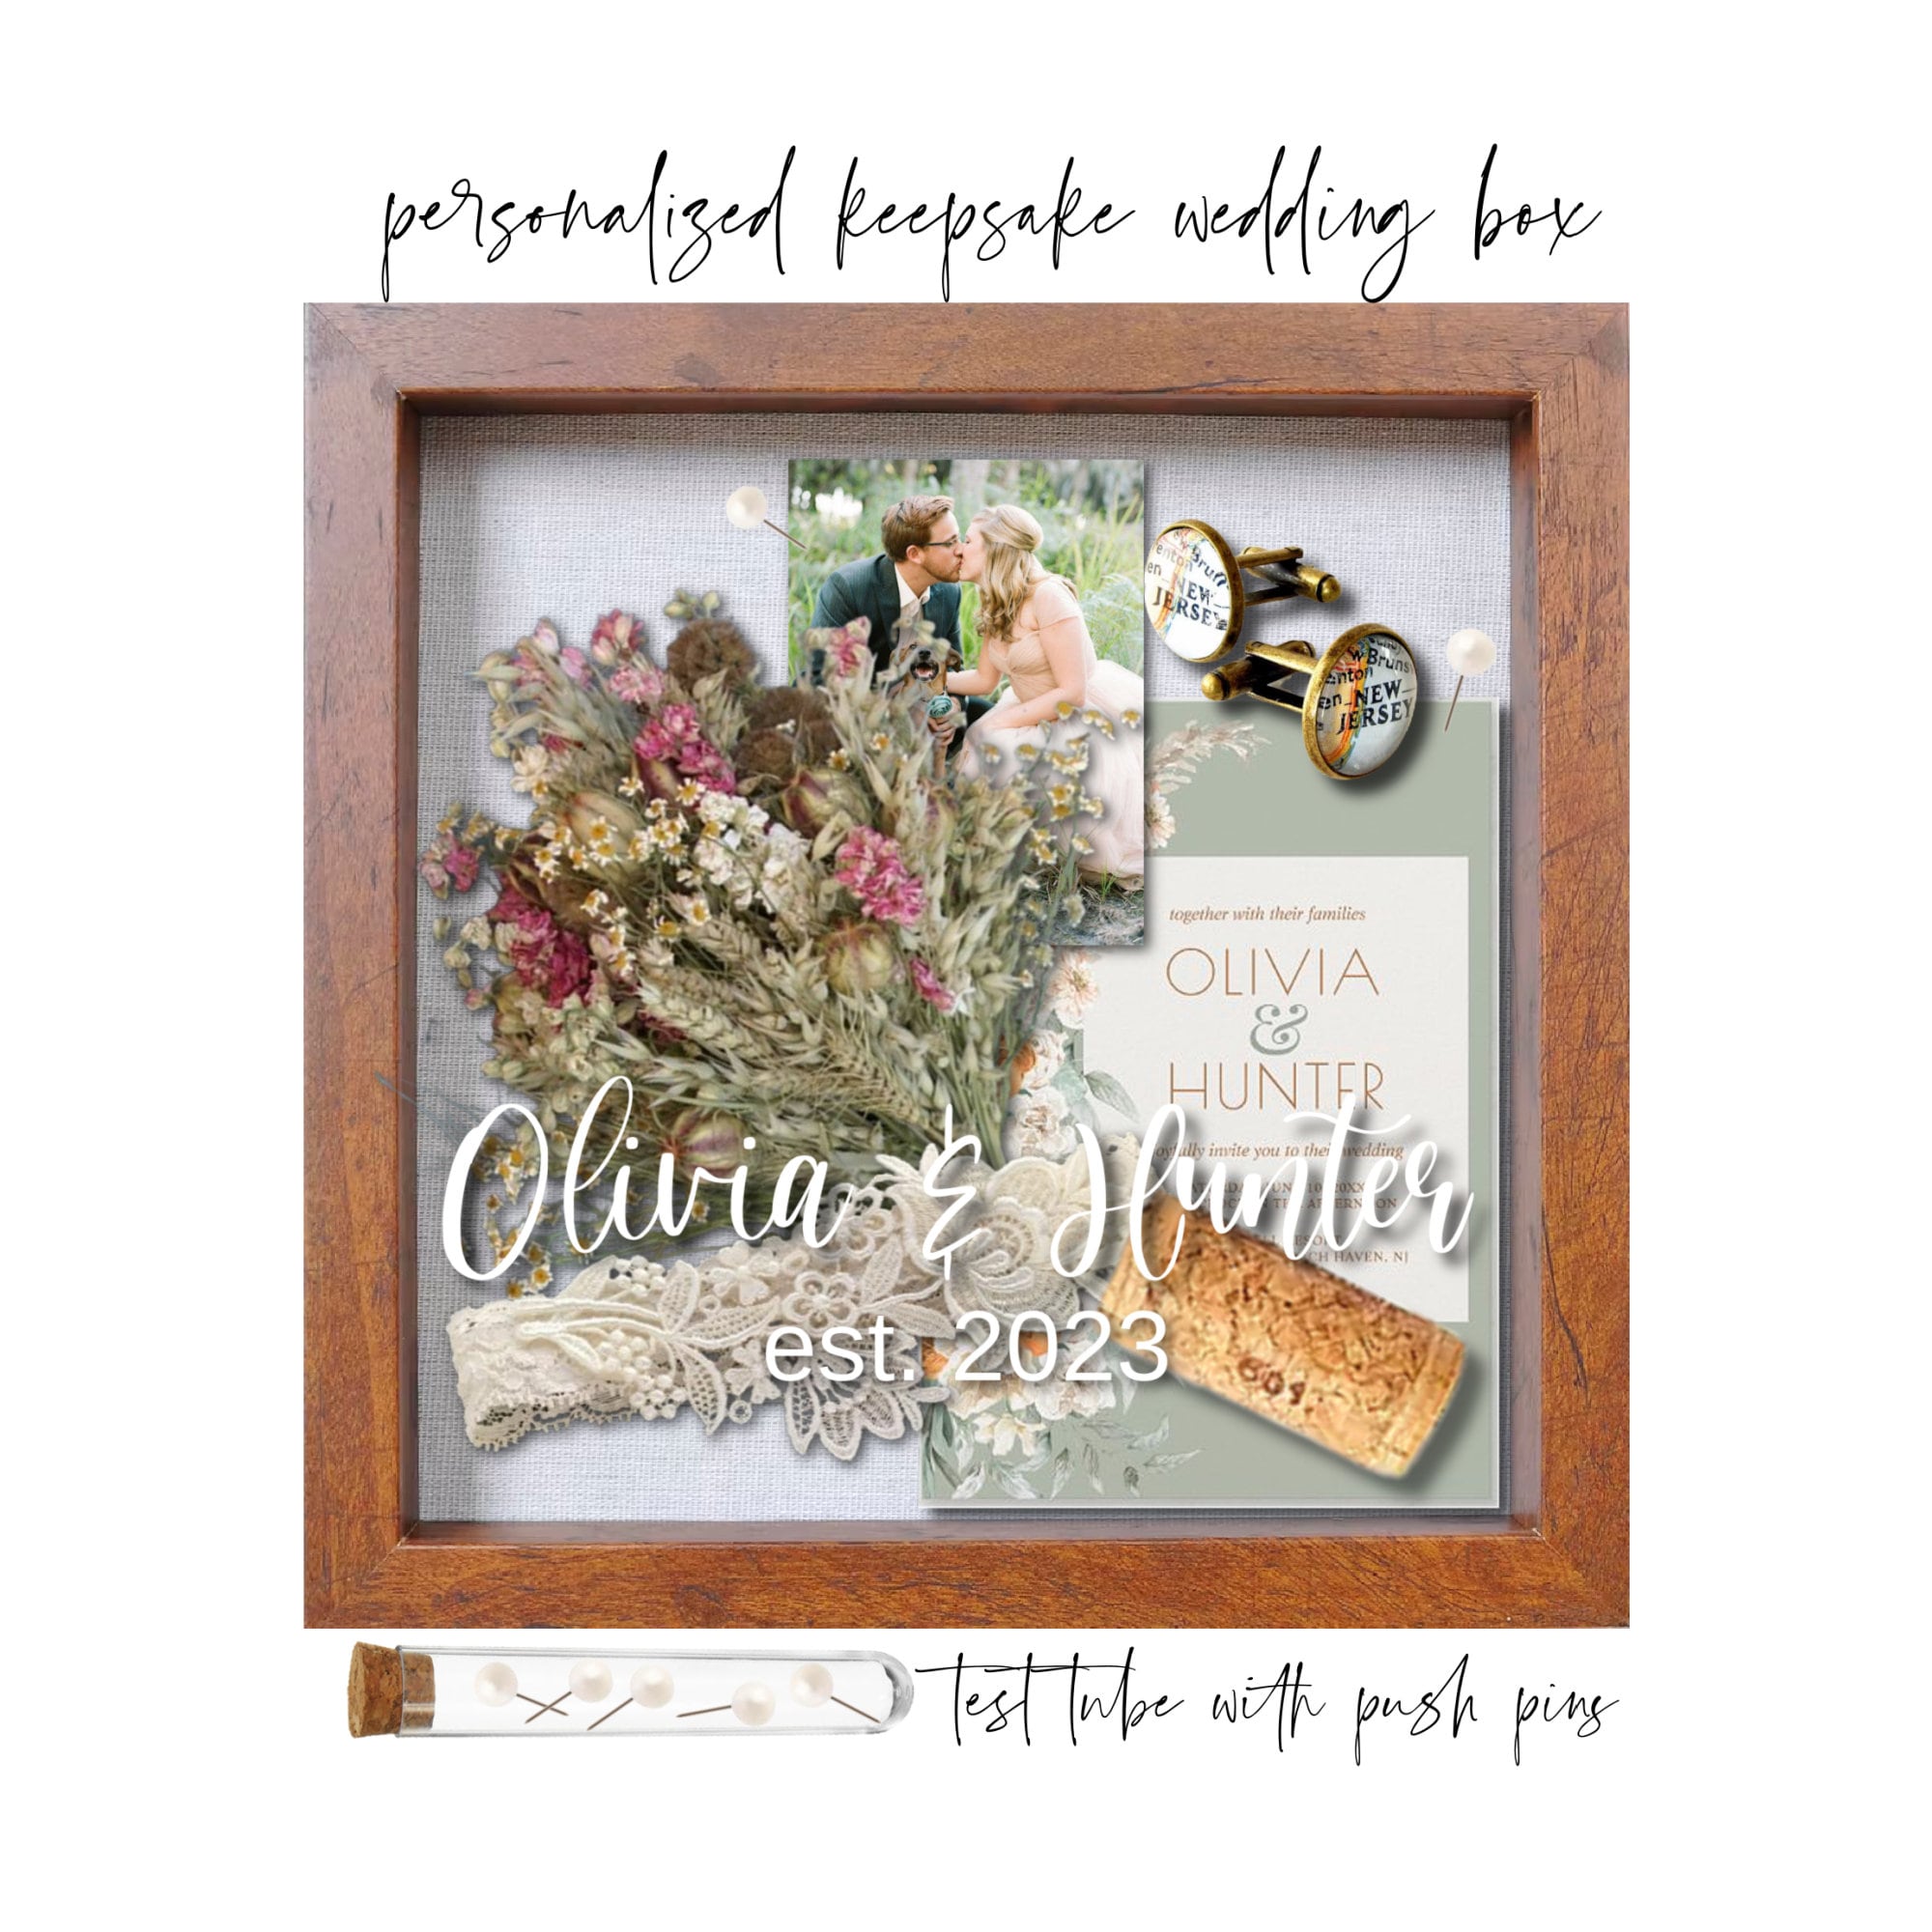 for Couples,Personalized Wedding Gifts, Keepsake Wedding Anniversary  Shadowbox Gift with The Couples Last Name and Date,Engagement Gifts for